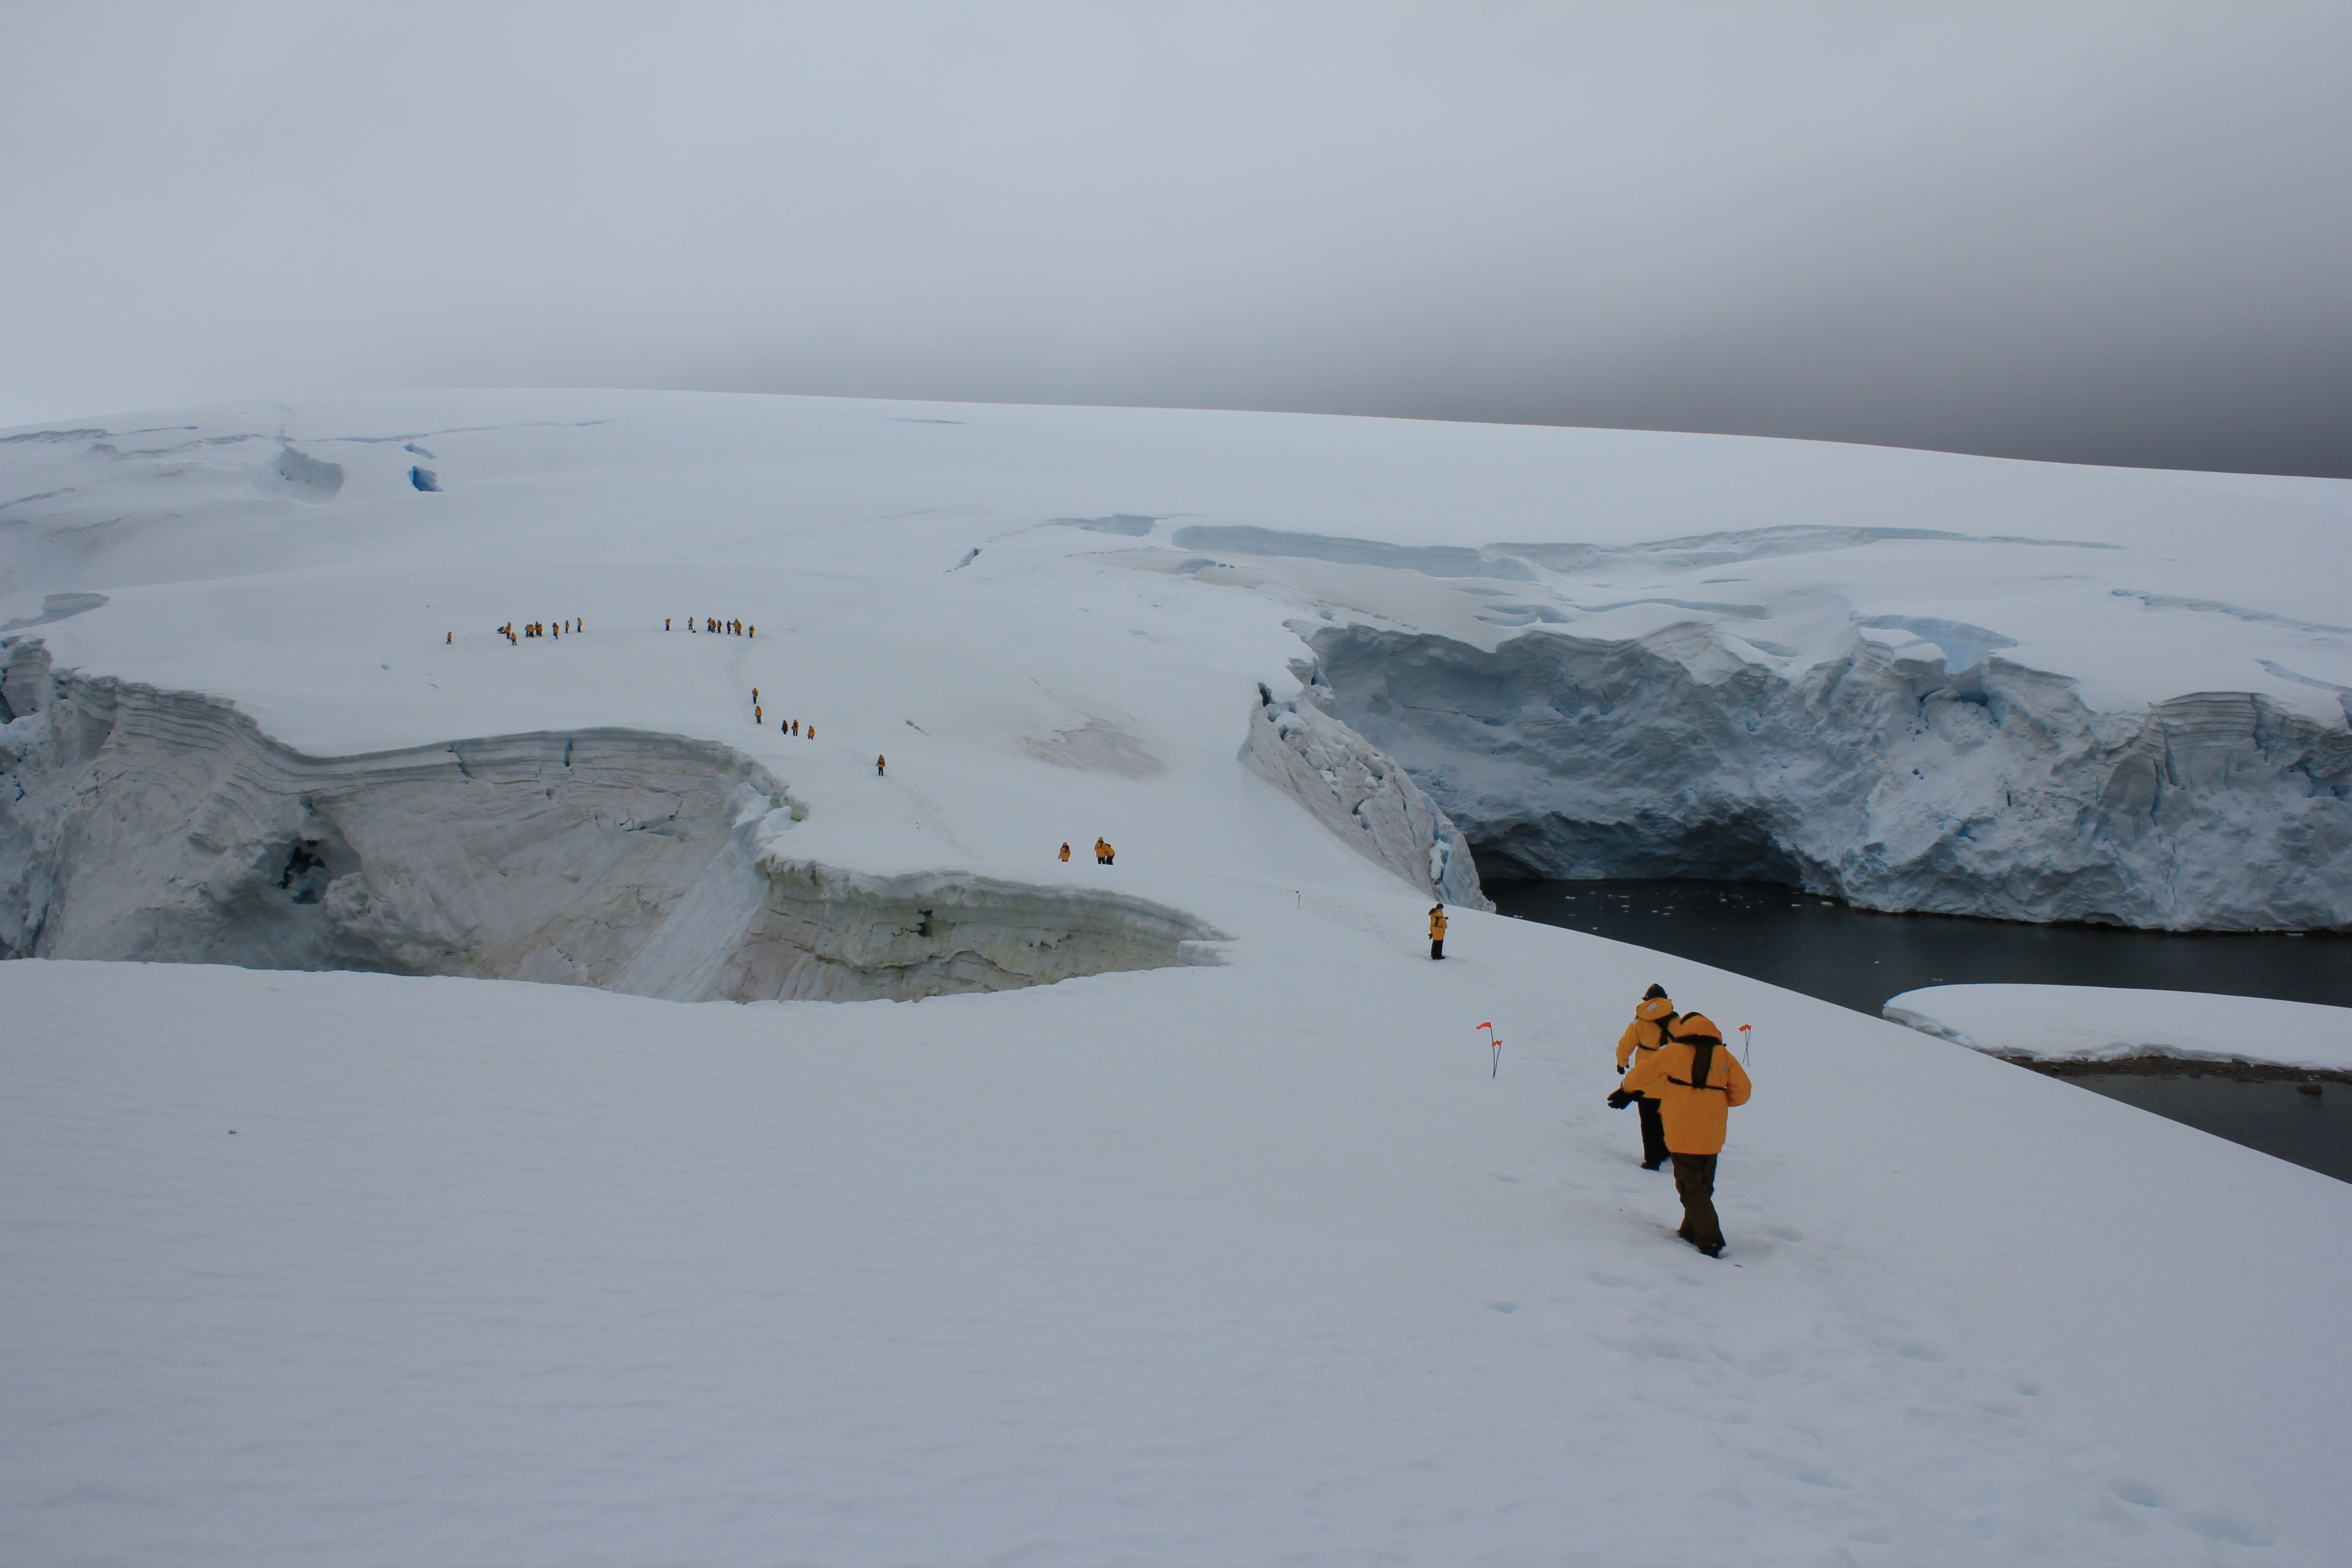 The sheer scale of Portal Point in Antarctica will play with your sense of perception.